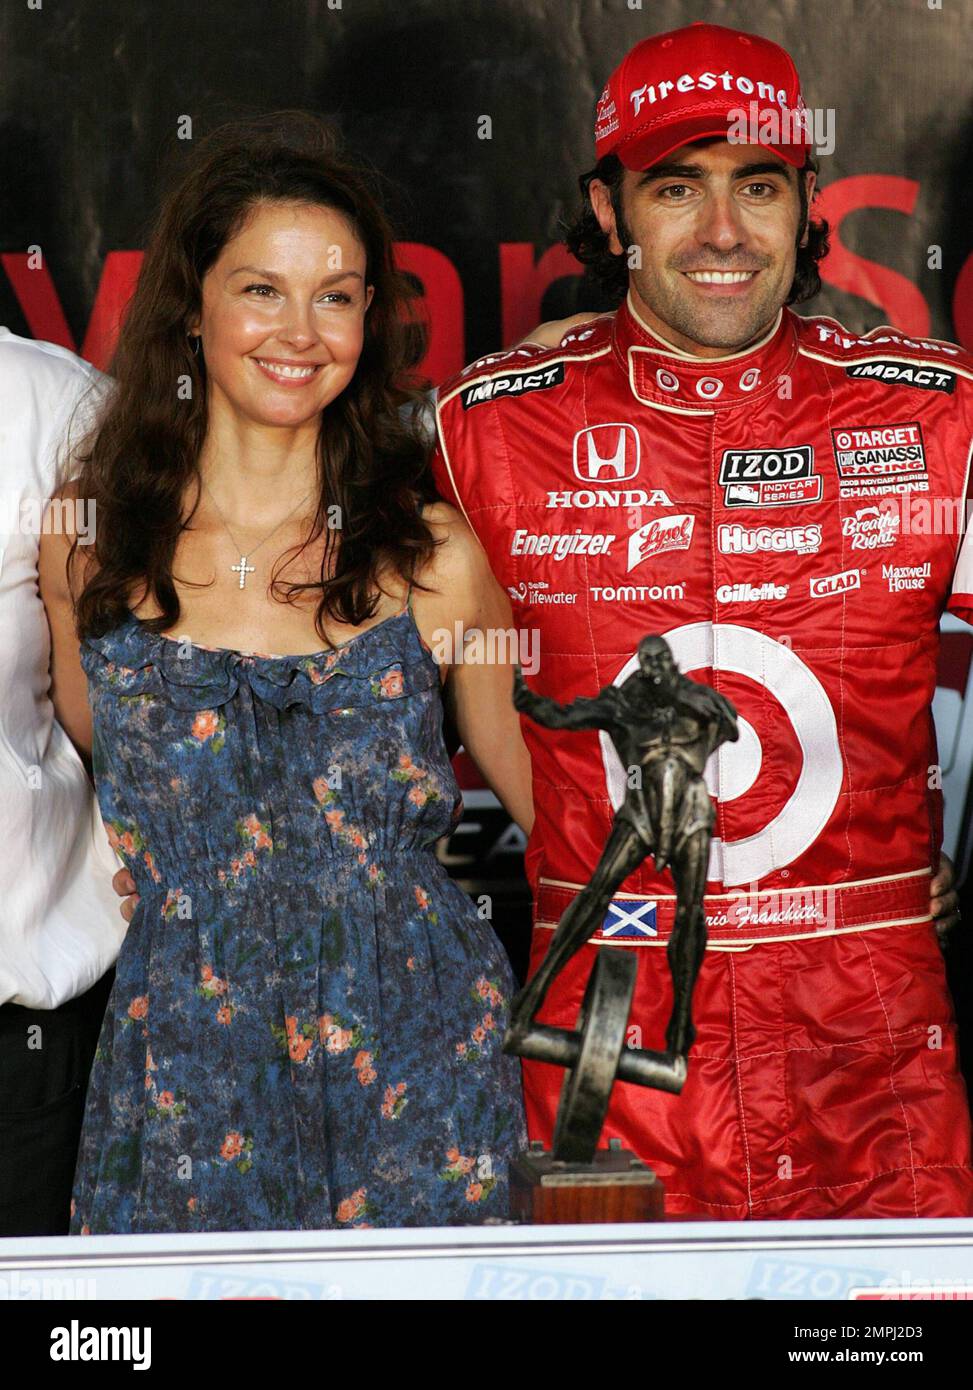 Indy Racing League driver Dario Franchitti and extremely happy